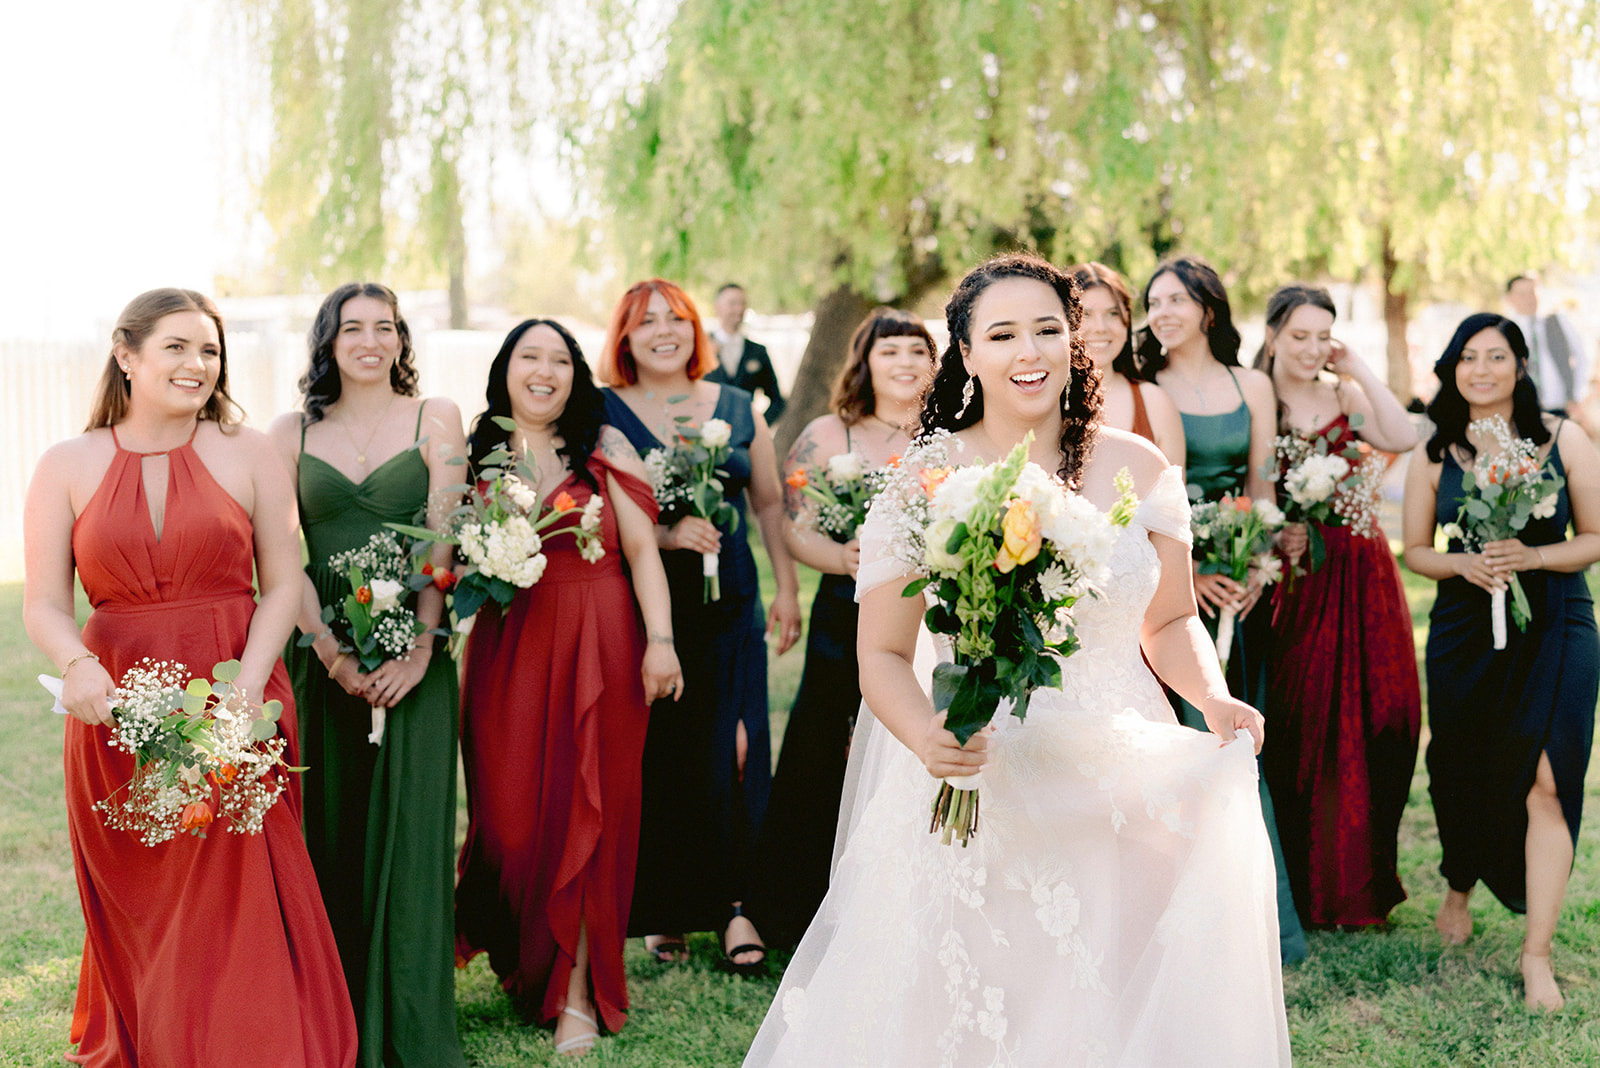 Classic romantic wedding, hunter green, sage,  champagne, rusty red bridesmaids and bride